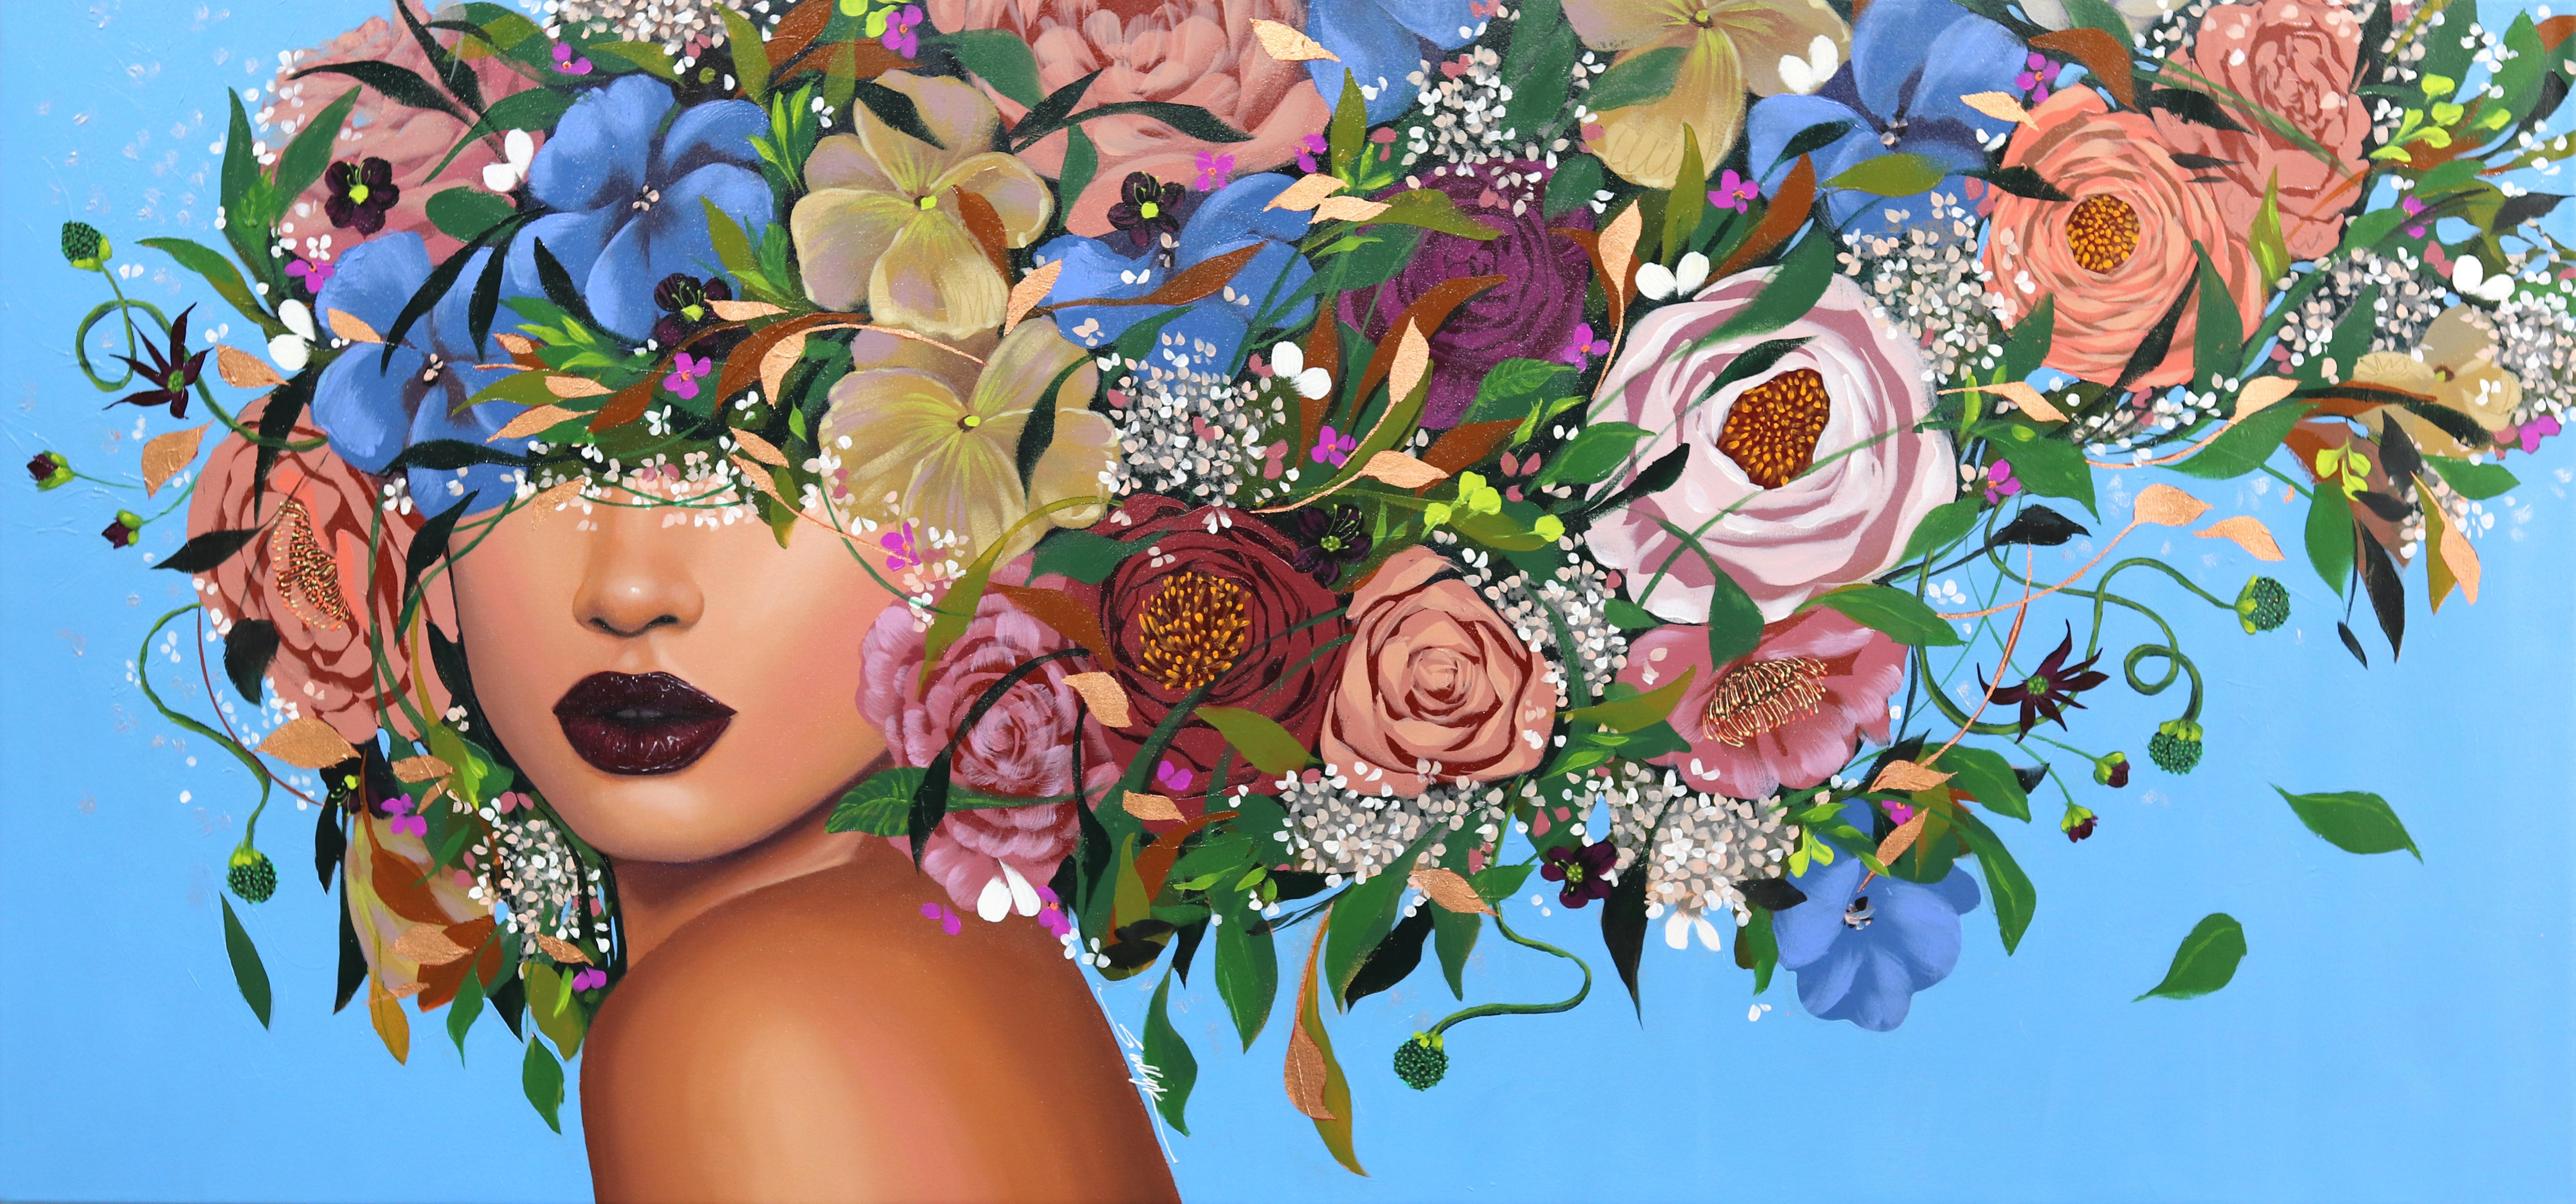 Lebanese American artist Sally K.'s captivating floral portraits are both mesmerizing and empowering. Her pop-realistic paintings are inspired by strong, feminine women, celebrating the individuality and inherent strength of the female experience.